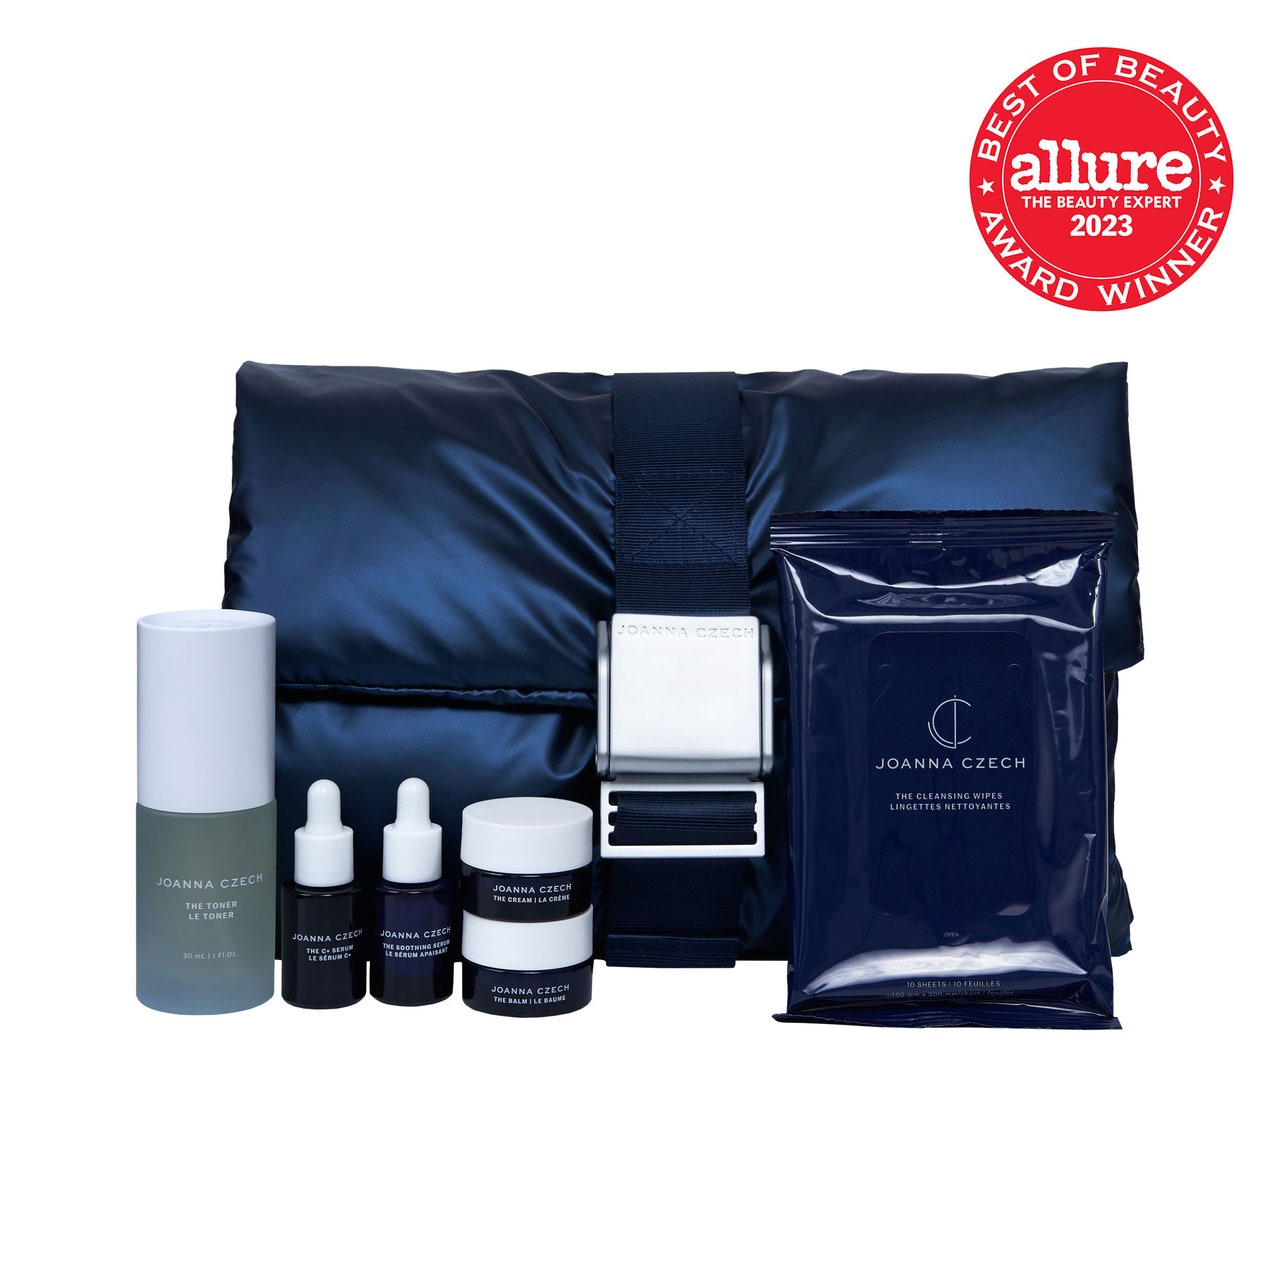 Joanna Czech Skincare The Minis Edit mini navy bottles of skincare products with white caps, navy face mask sachets, and navy pillow on white background with red Allure BoB seal in the top right corner